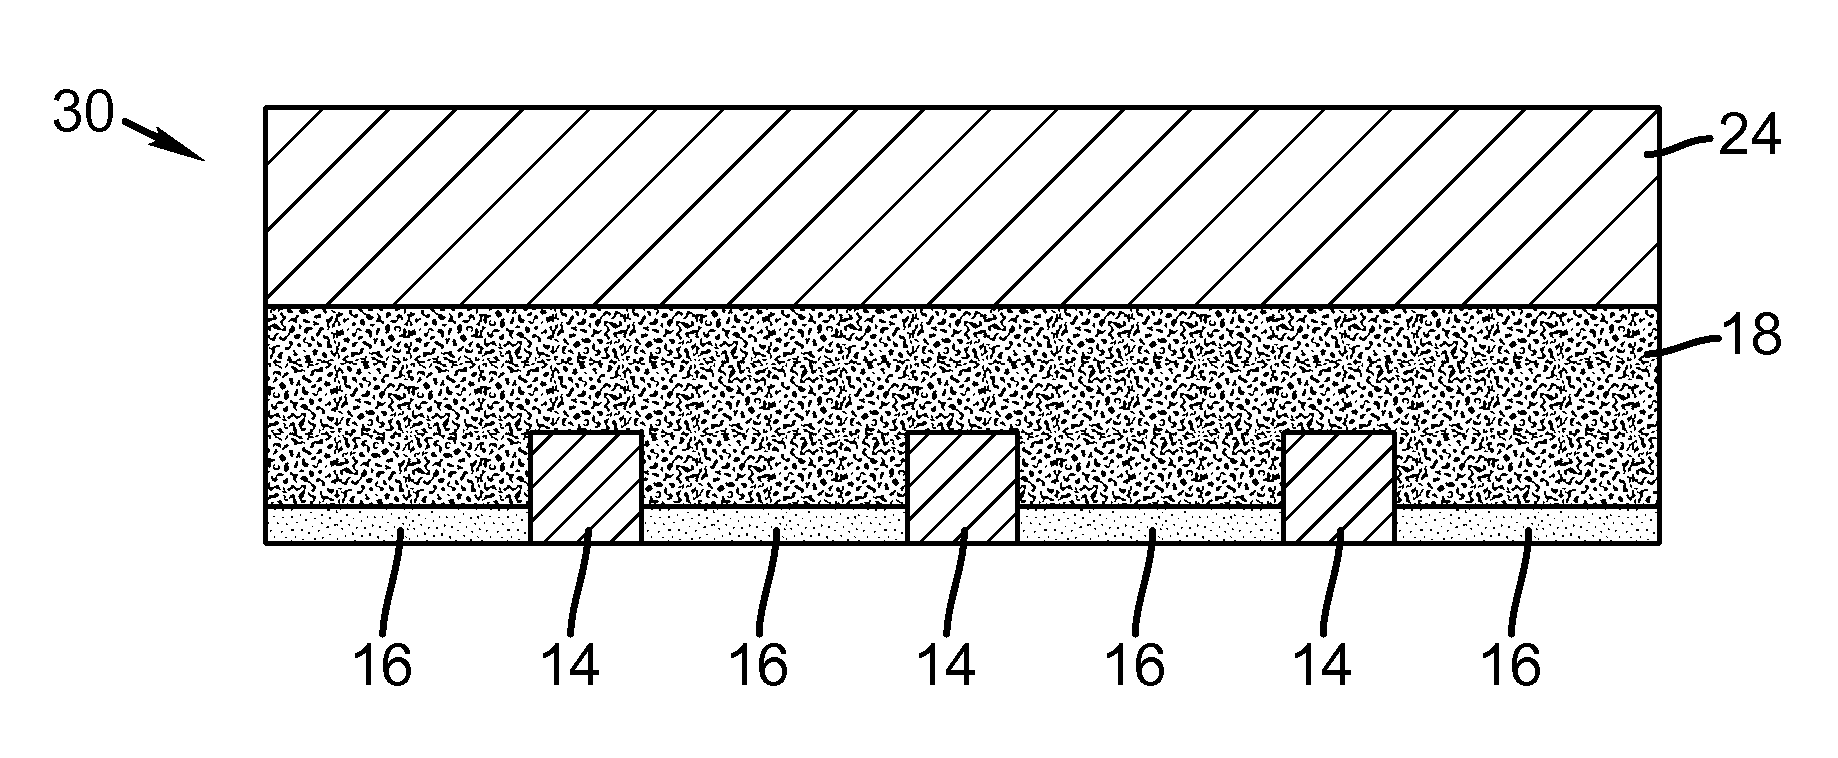 Article with metal grid composite and methods of preparing